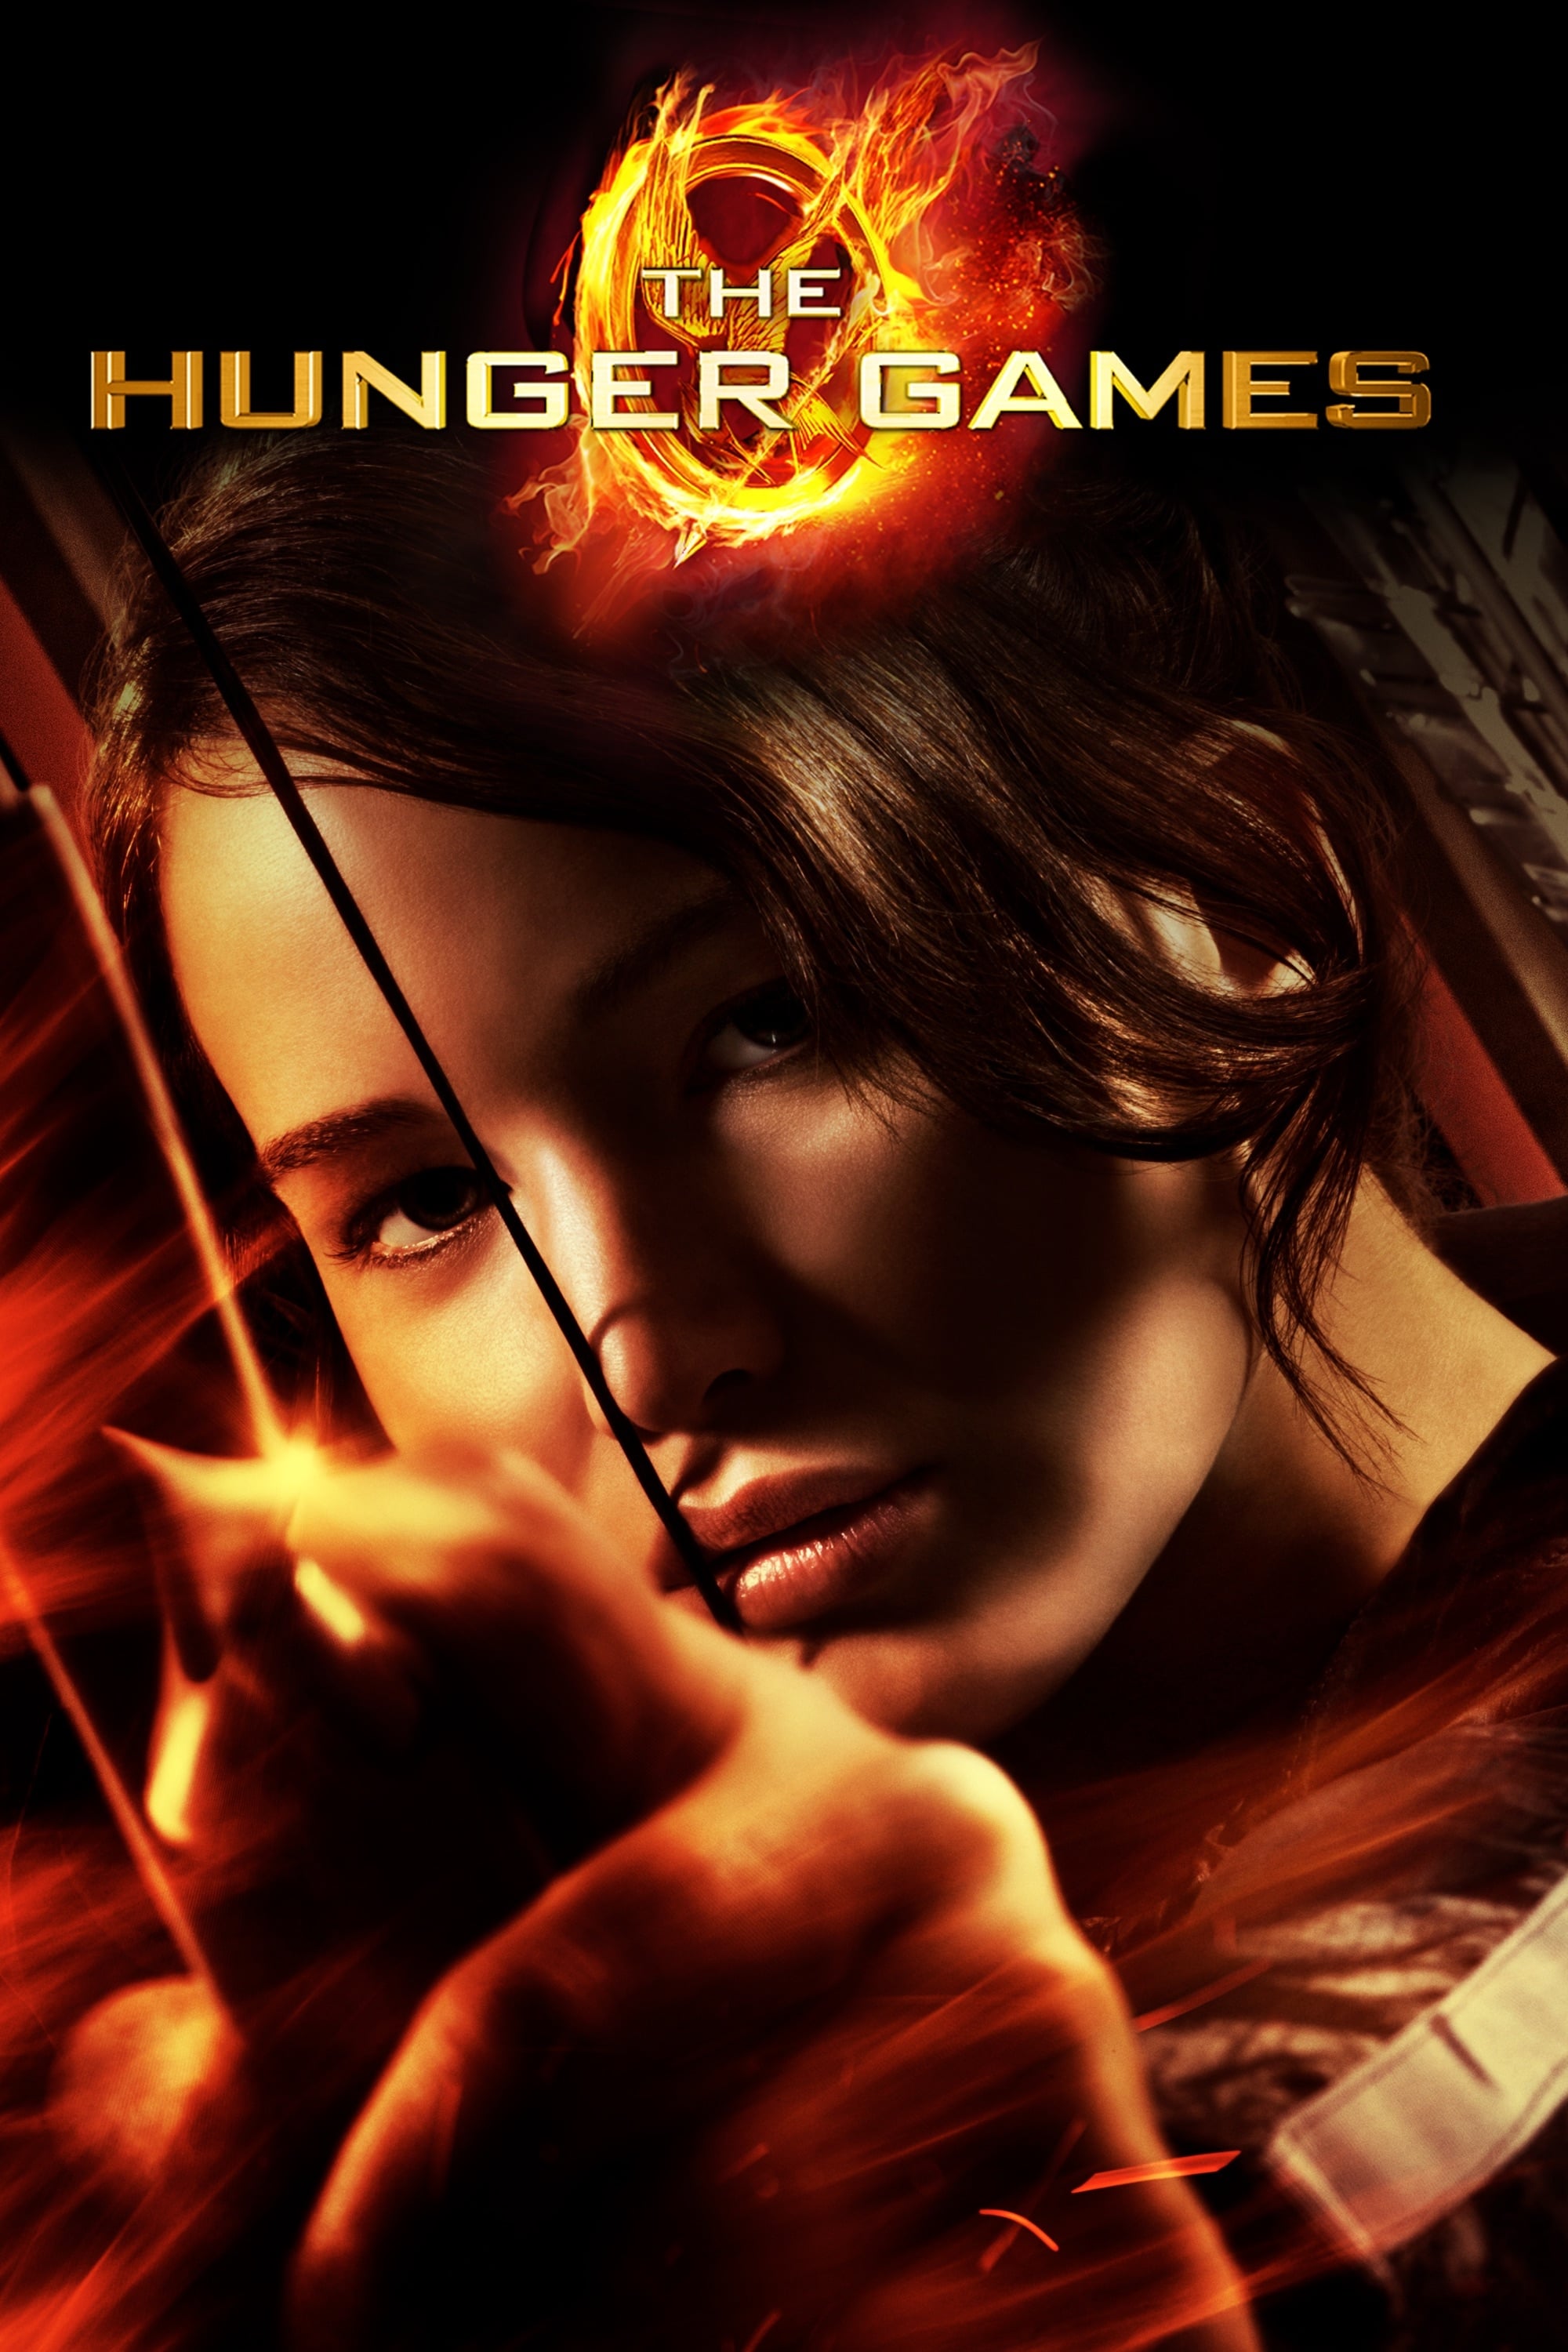 The Hunger Games (2012) Hindi ORG Dual Audio 1080p 720p 480p BluRay Download